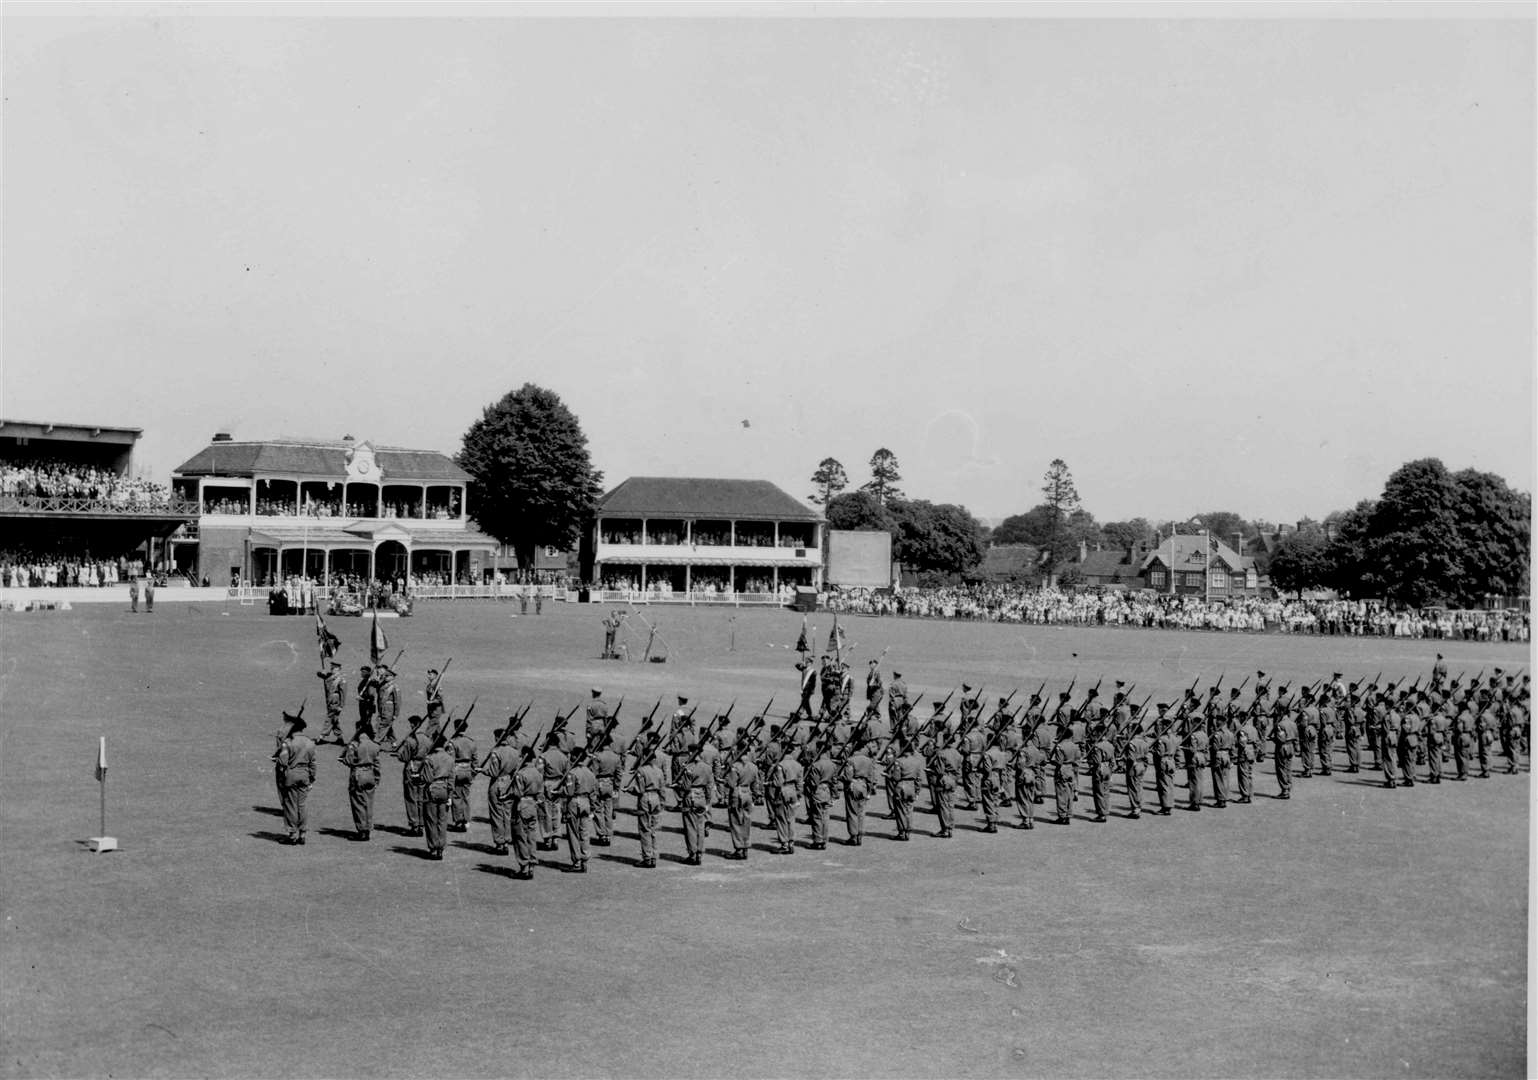 King Frederik 1X of Denmark presents new colours to the 4th and 5th Battalions The Buffs at the St Lawrence Ground, watched by 3,000 guests in June 1960. File picture from Images of Canterbury book